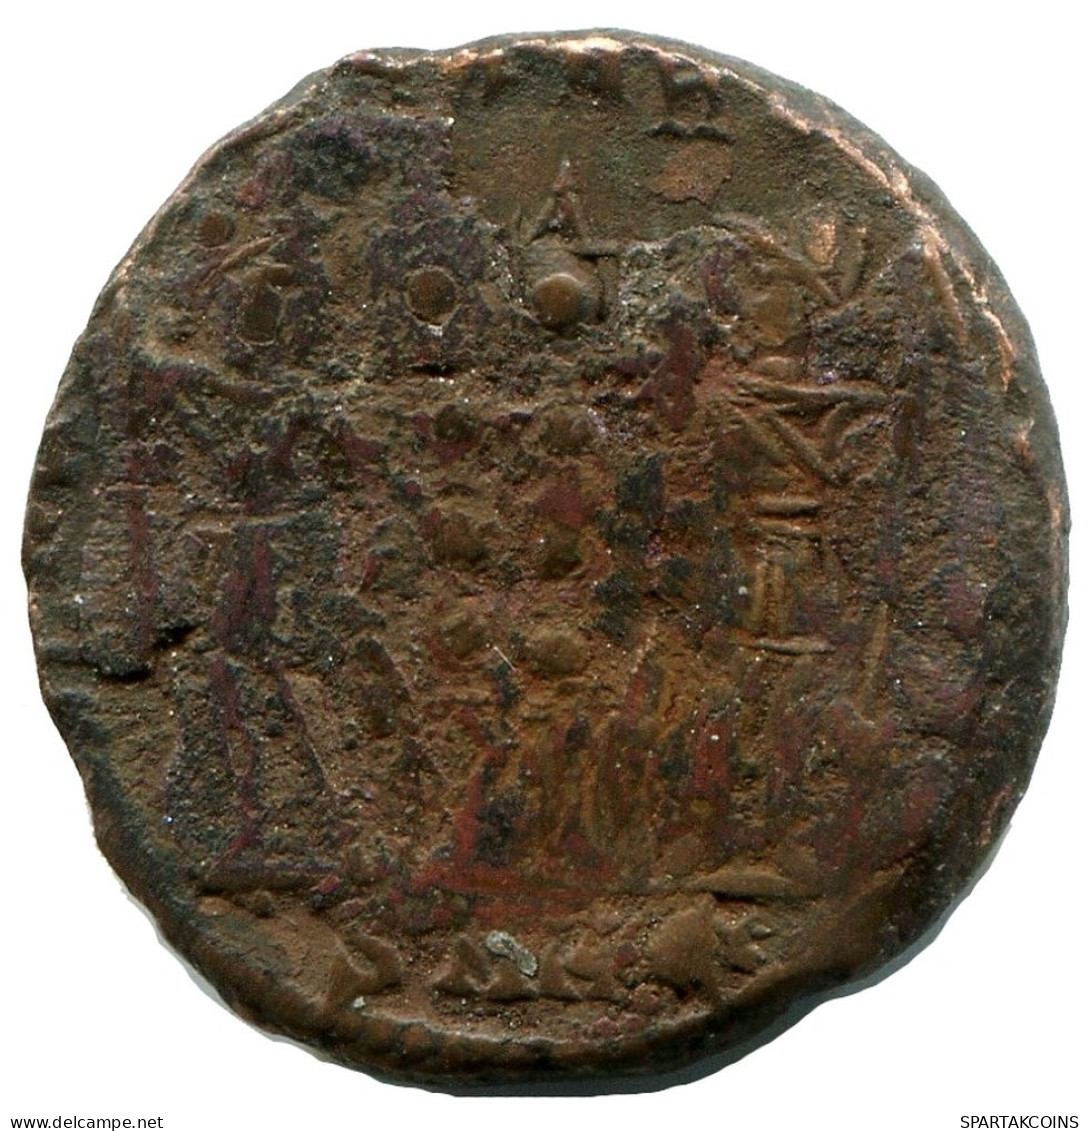 CONSTANTINE I MINTED IN HERACLEA FOUND IN IHNASYAH HOARD EGYPT #ANC11198.14.D.A - L'Empire Chrétien (307 à 363)